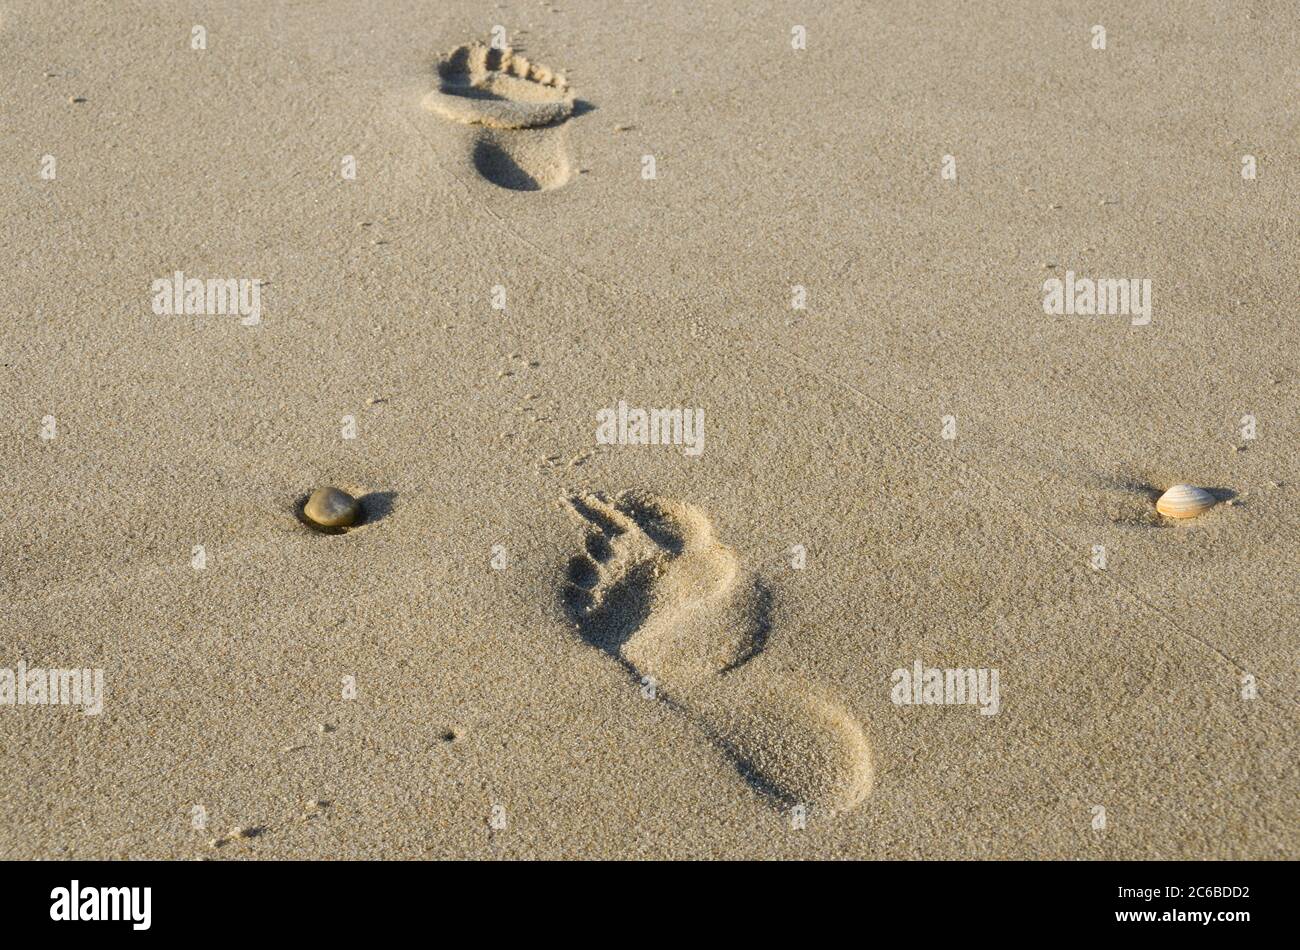 Footsteps in the sand at the beach Stock Photo